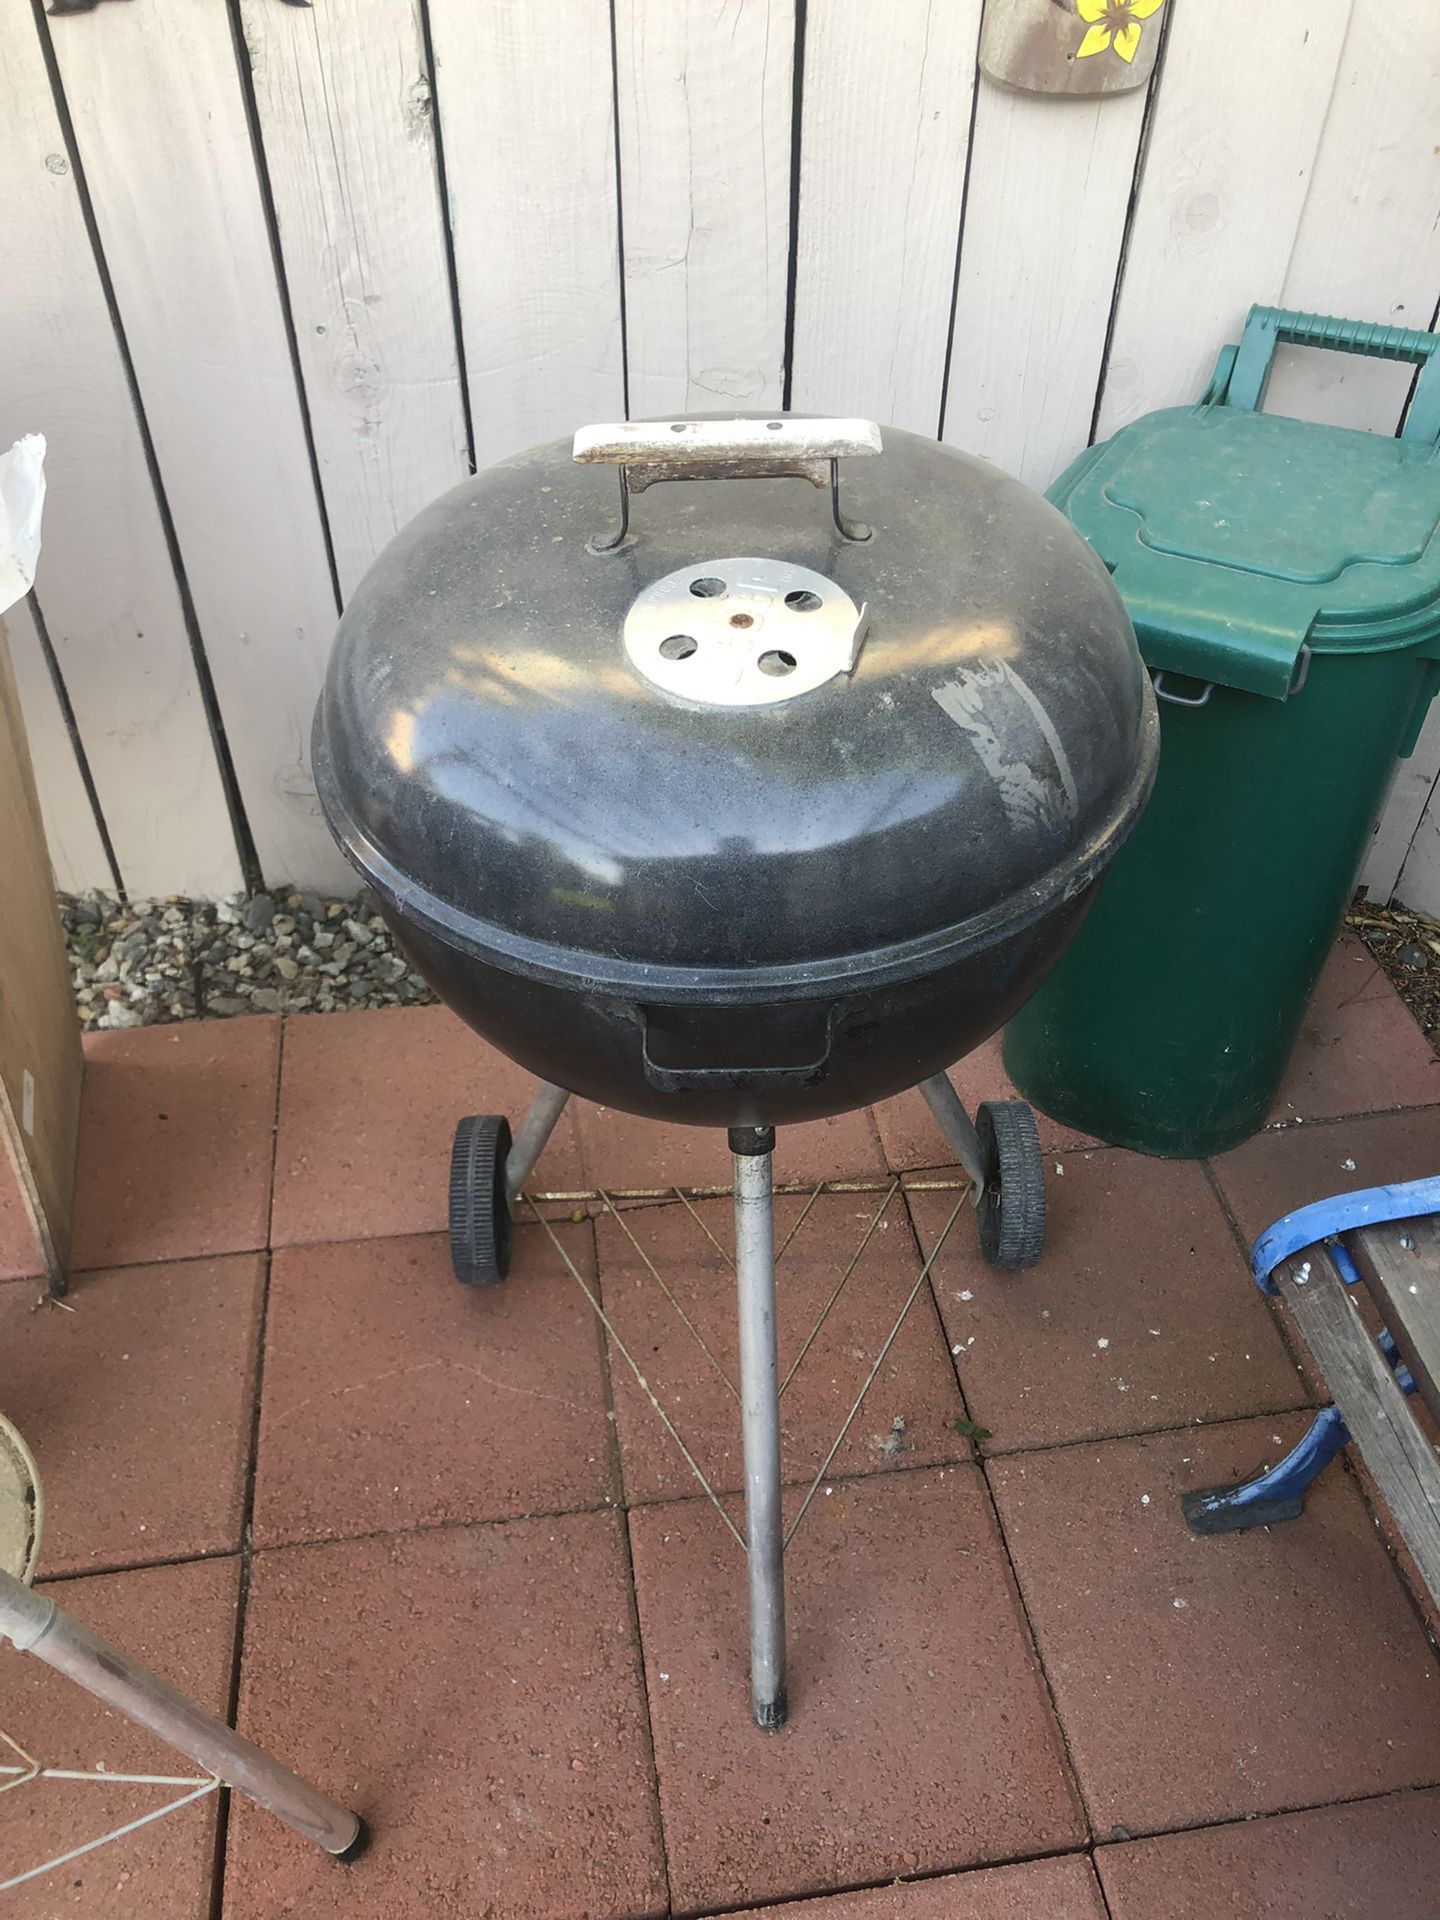 Weber Charcoal Grill In Great Working Condition Selling For $20!!!